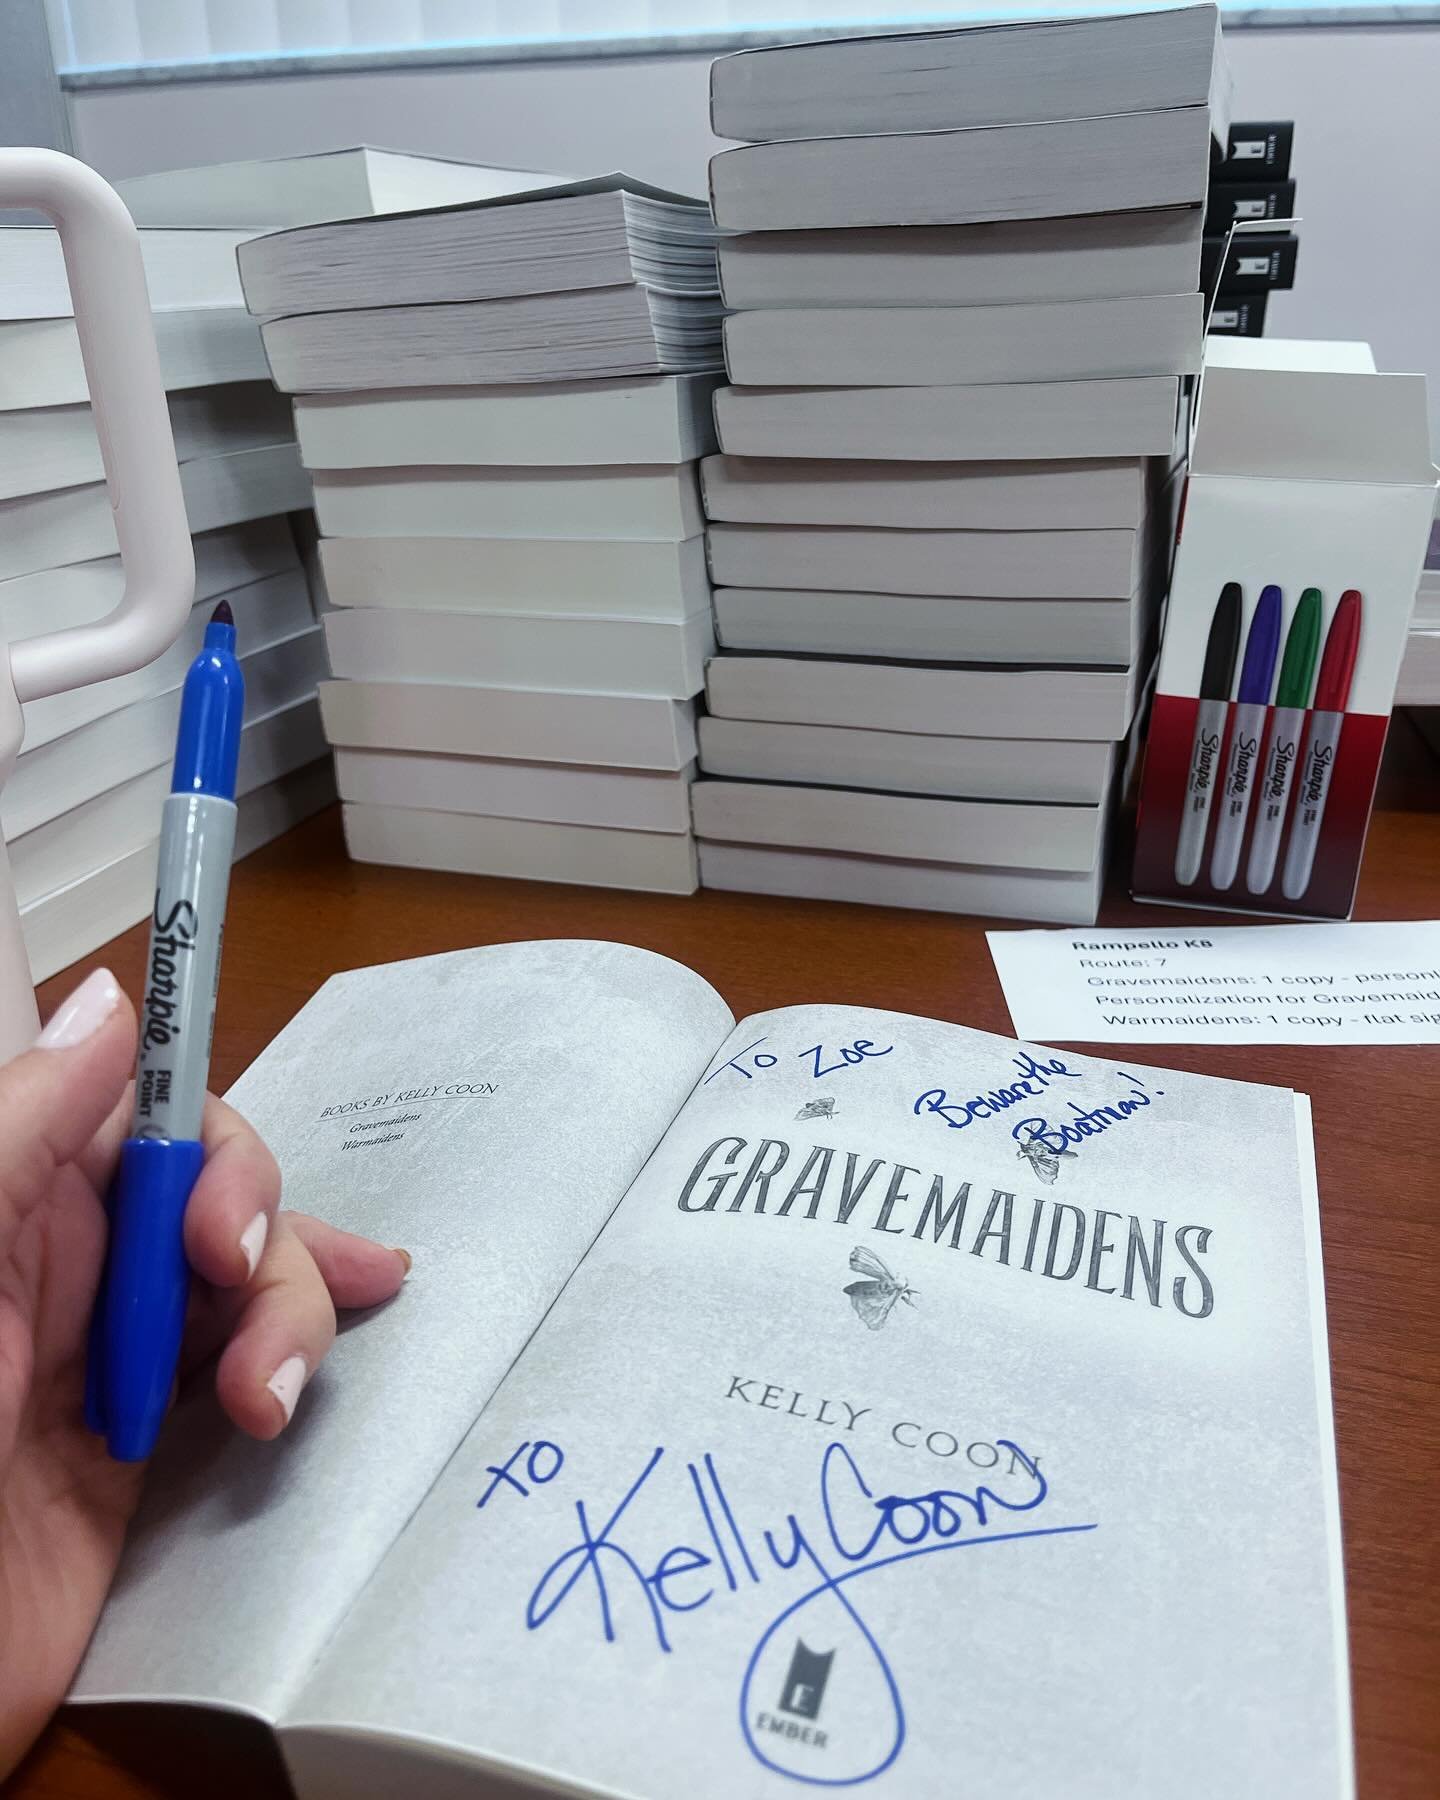 Signing book orders after the SLAM Showcase for Hillsborough County Schools! Thanks @kdefusco and the other media specialist masterminds who make our schools better one book at a time. Xoxoxoxo 

#bookstagram #bookish #amreading #authorsofinsta #auth